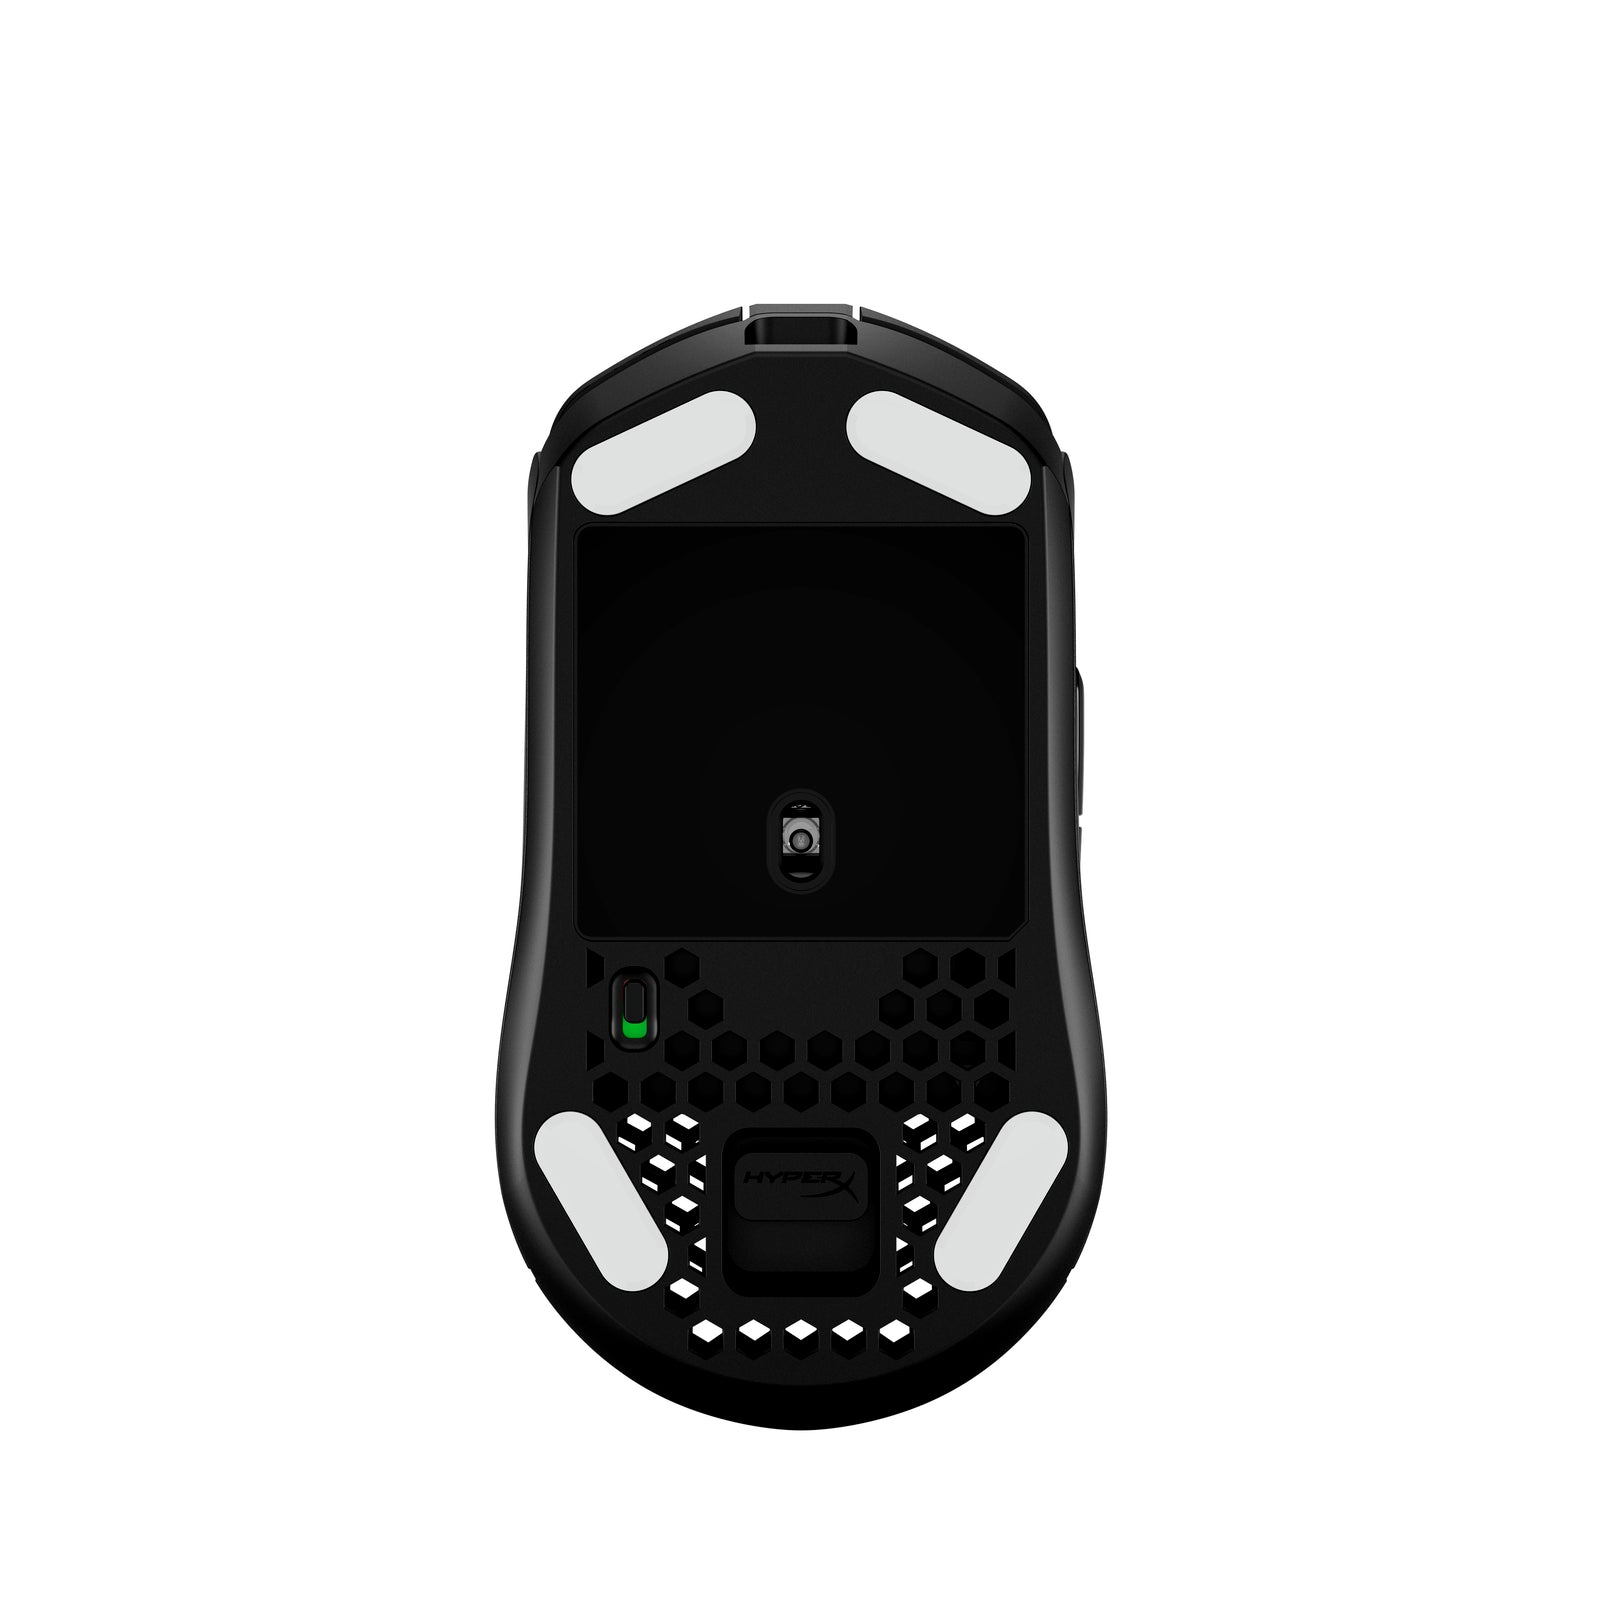 HyperX Pulsefire Haste Wireless Black gaming mouse , view of the bottom side, featuring the sensor, usb dongle and skates